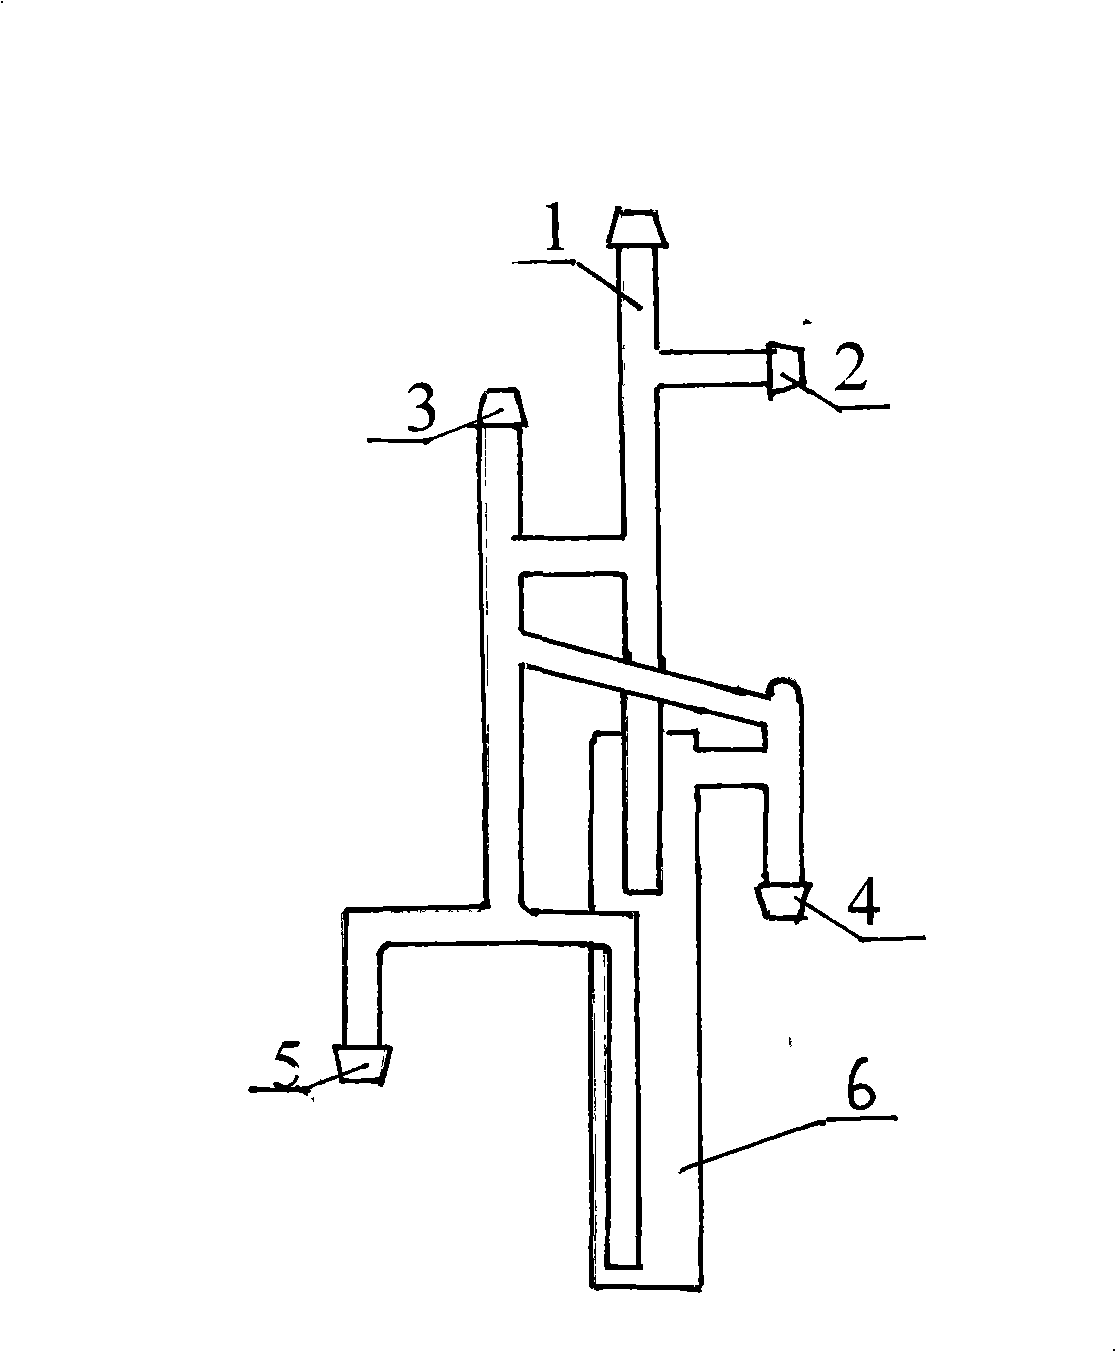 Apparatus for separating hydrochloric acid from germanic chloride for optical fiber